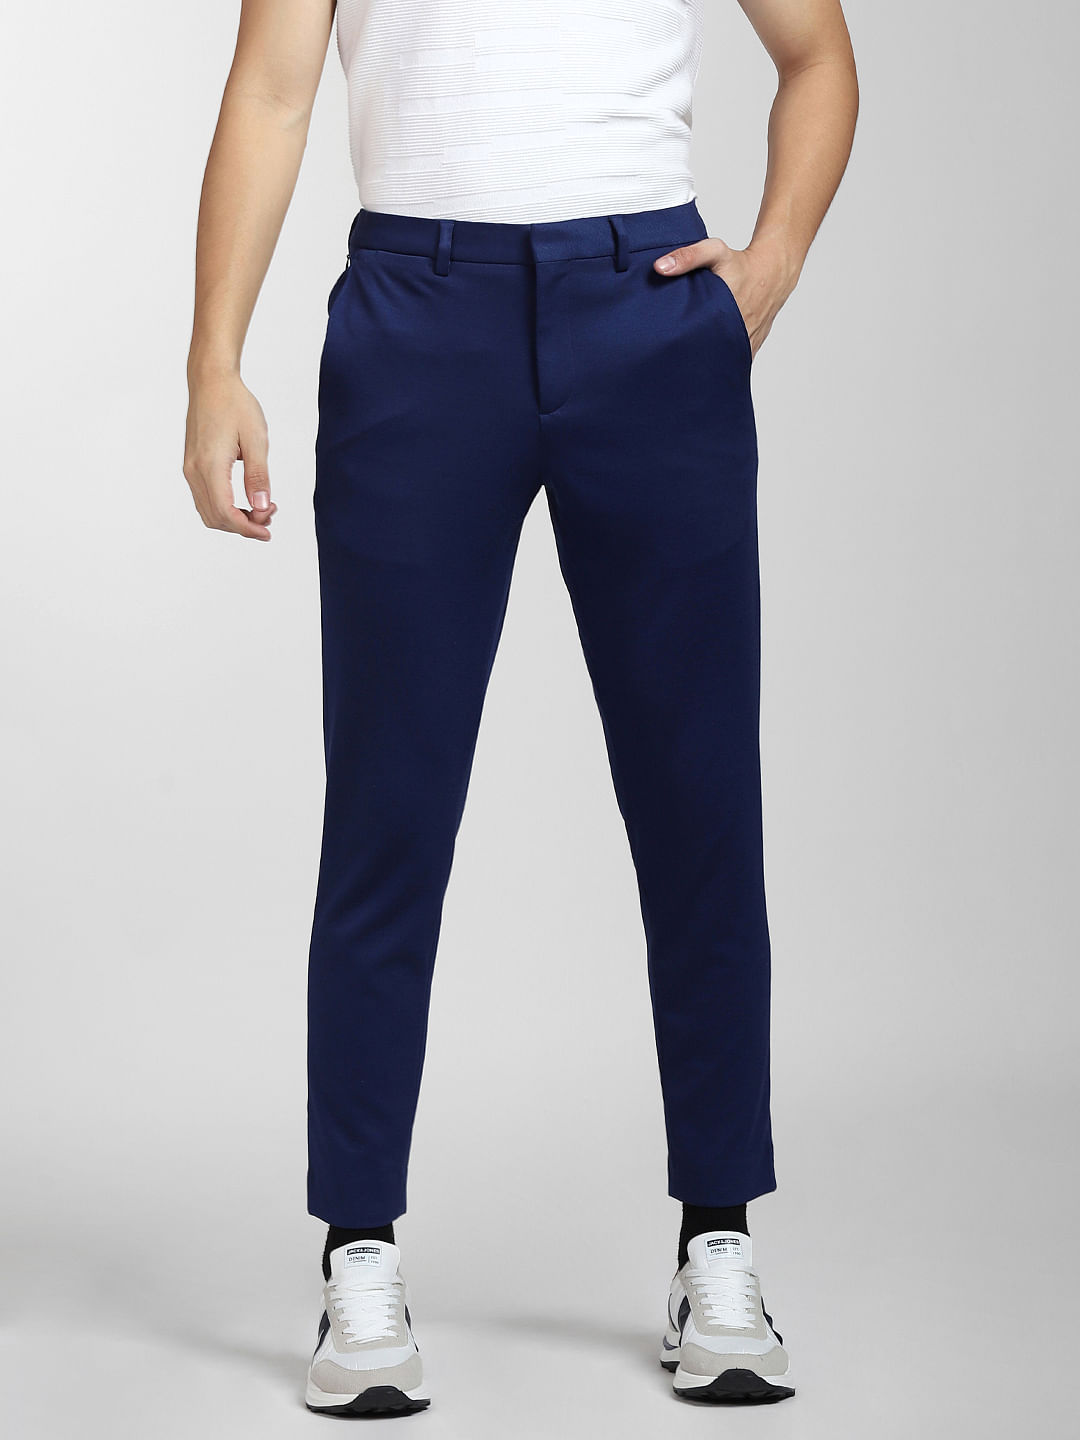 Royal Blue Formal and casual Pant online for men  Beyours  Page 4